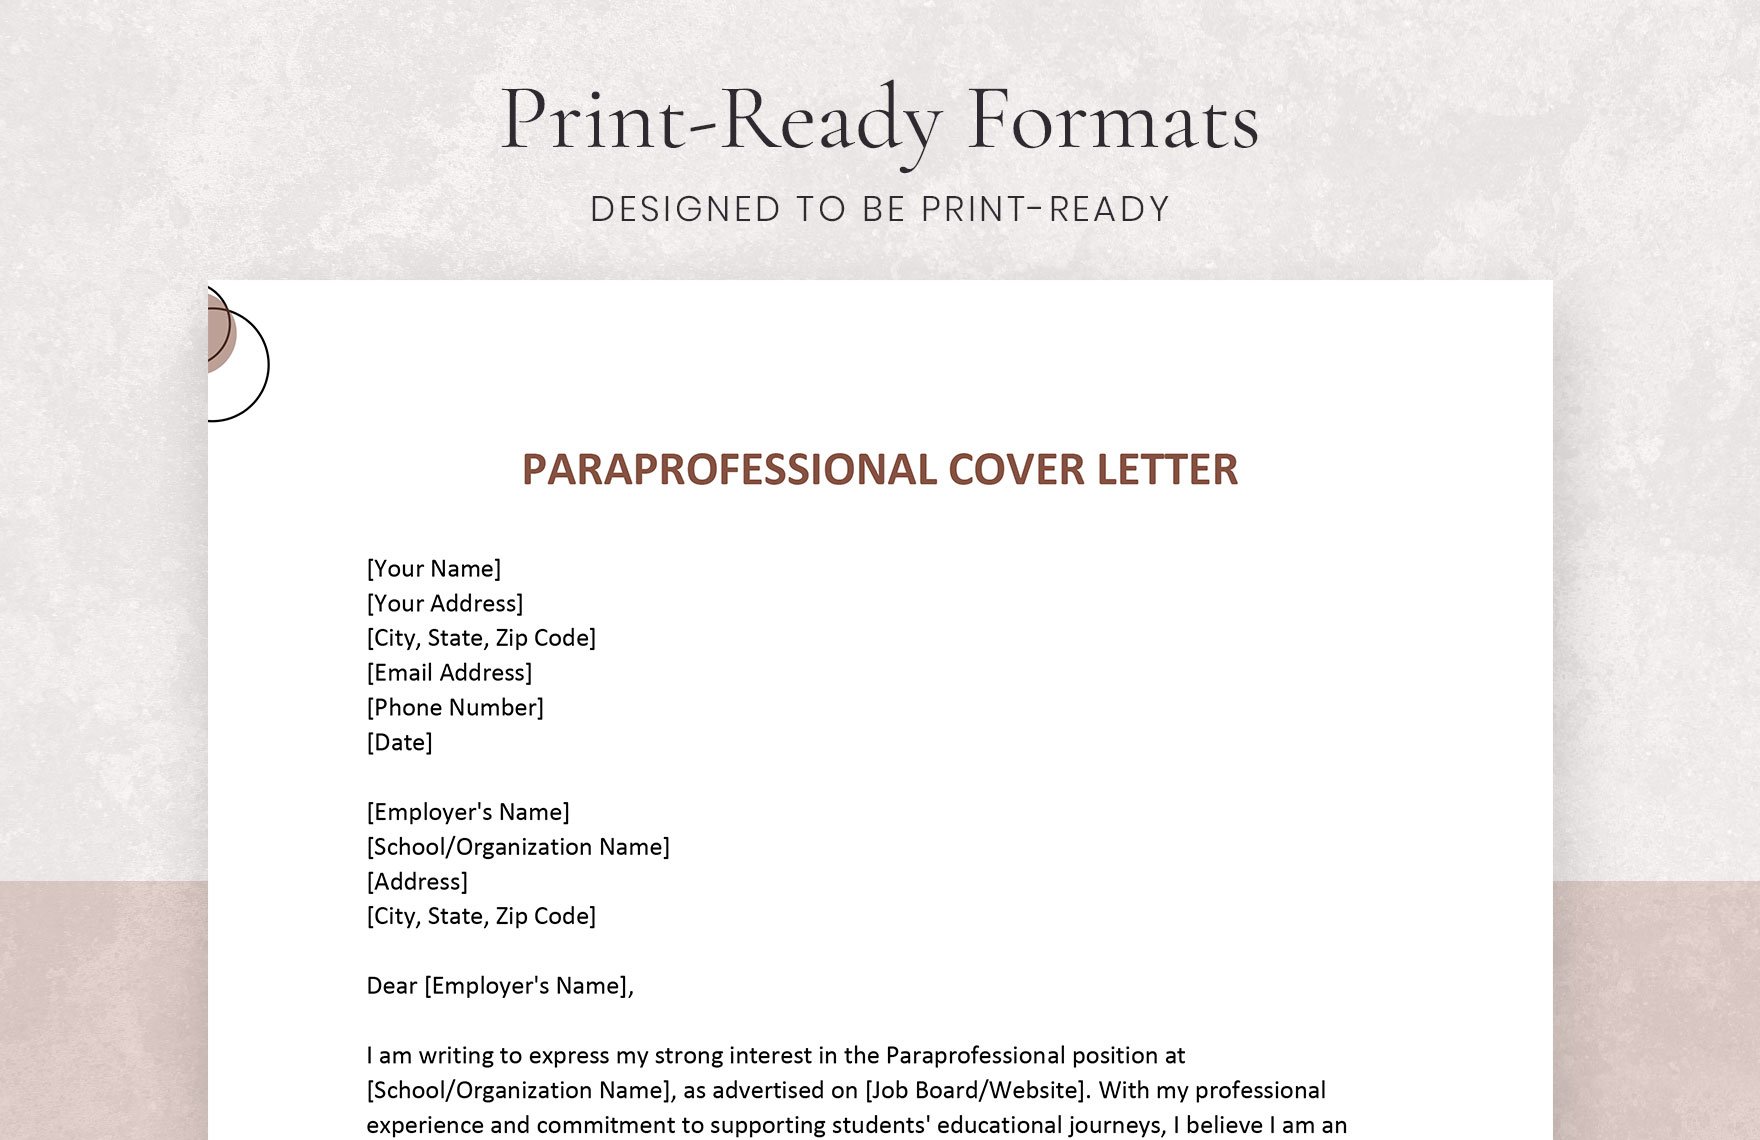 Paraprofessional Cover Letter